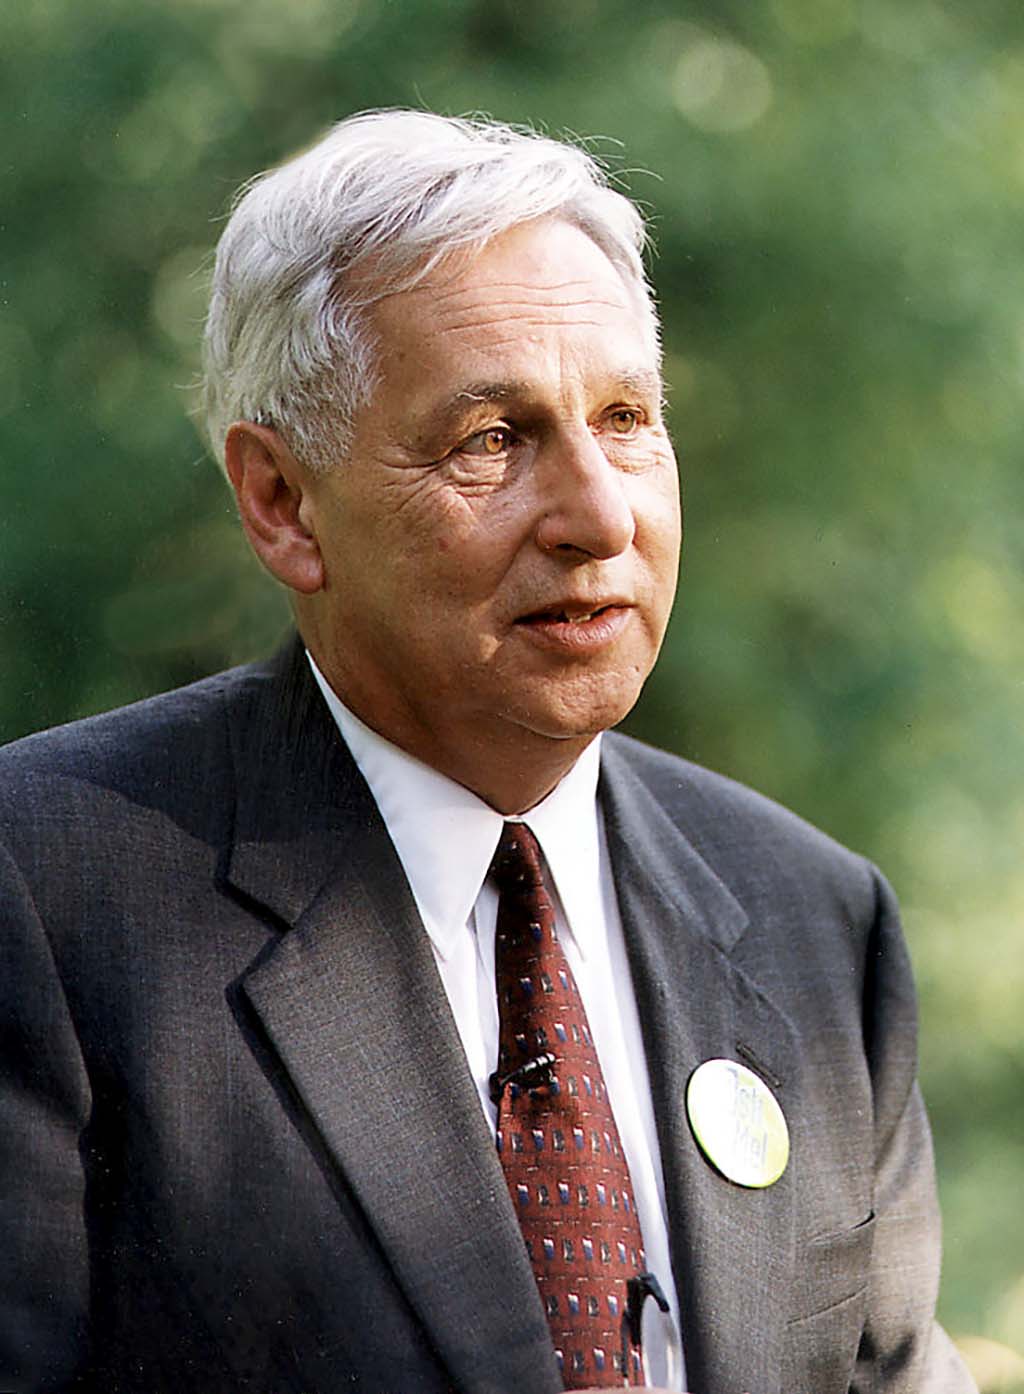 https://www.historylink.org/Content/Media/Photos/Large/Seattle-Mayor-Paul-Schell-official-photo-2000.jpg